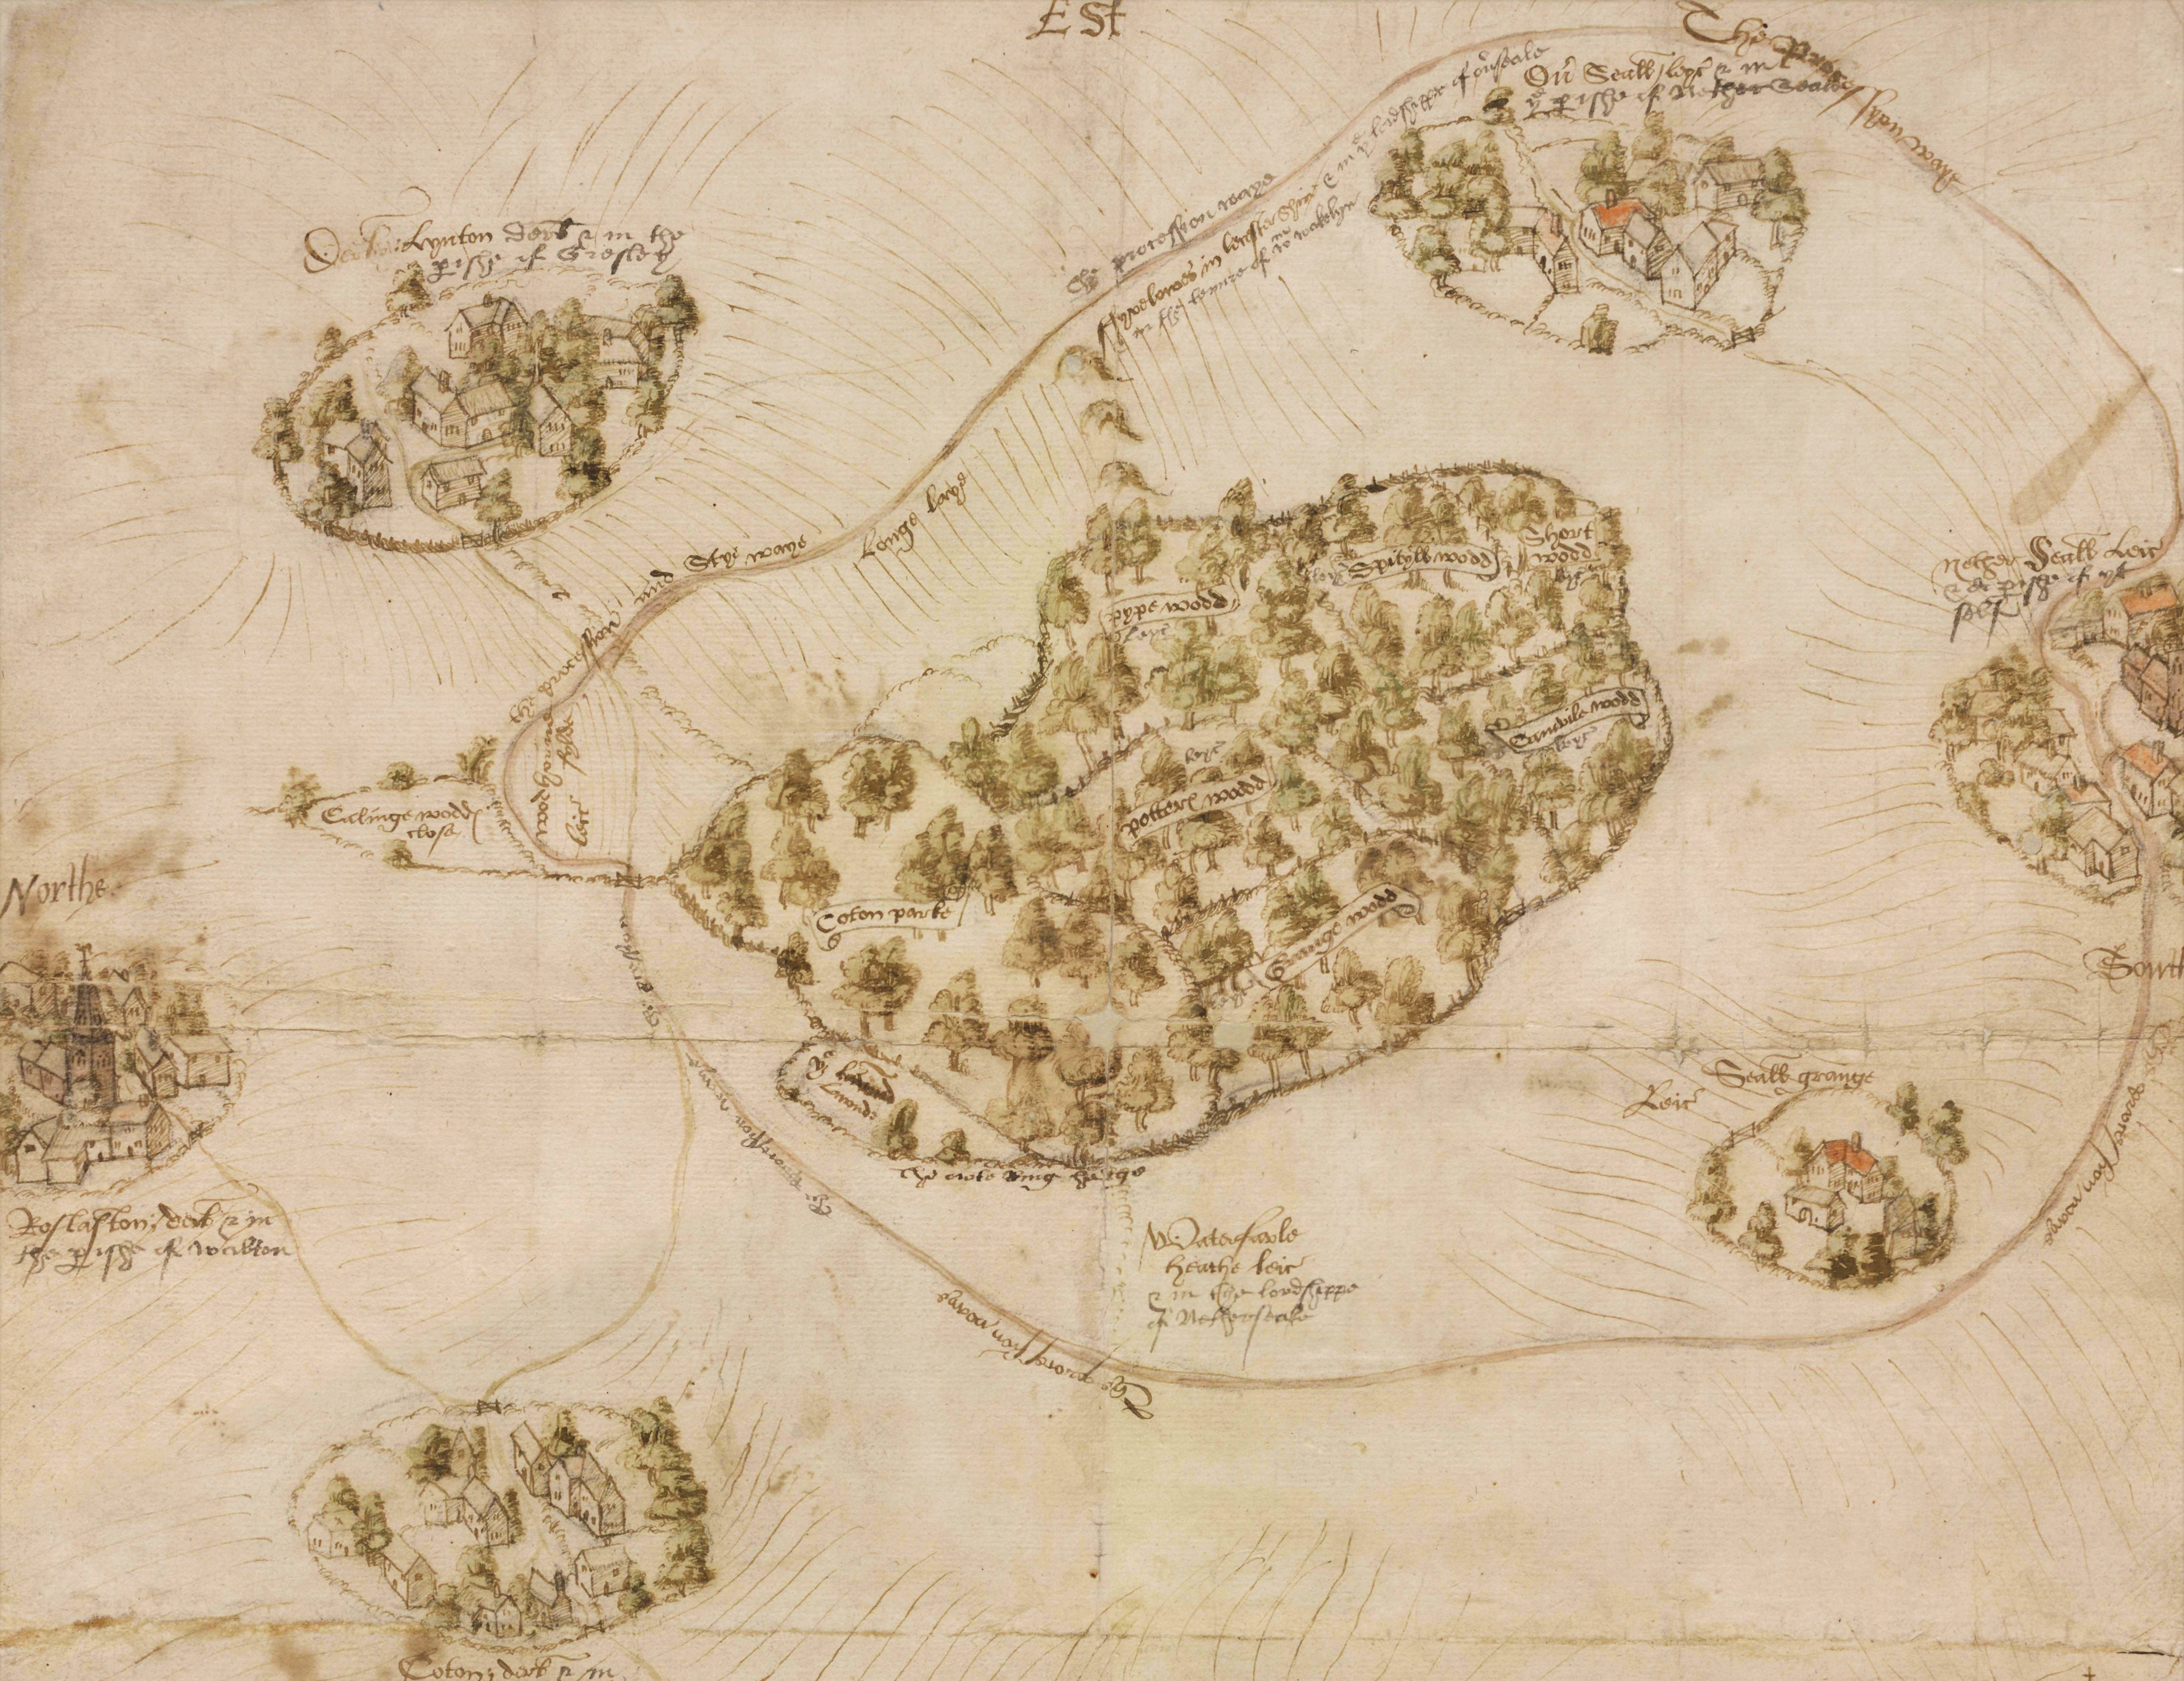 Map of Seale, 16th century (ref: D77/8/10)